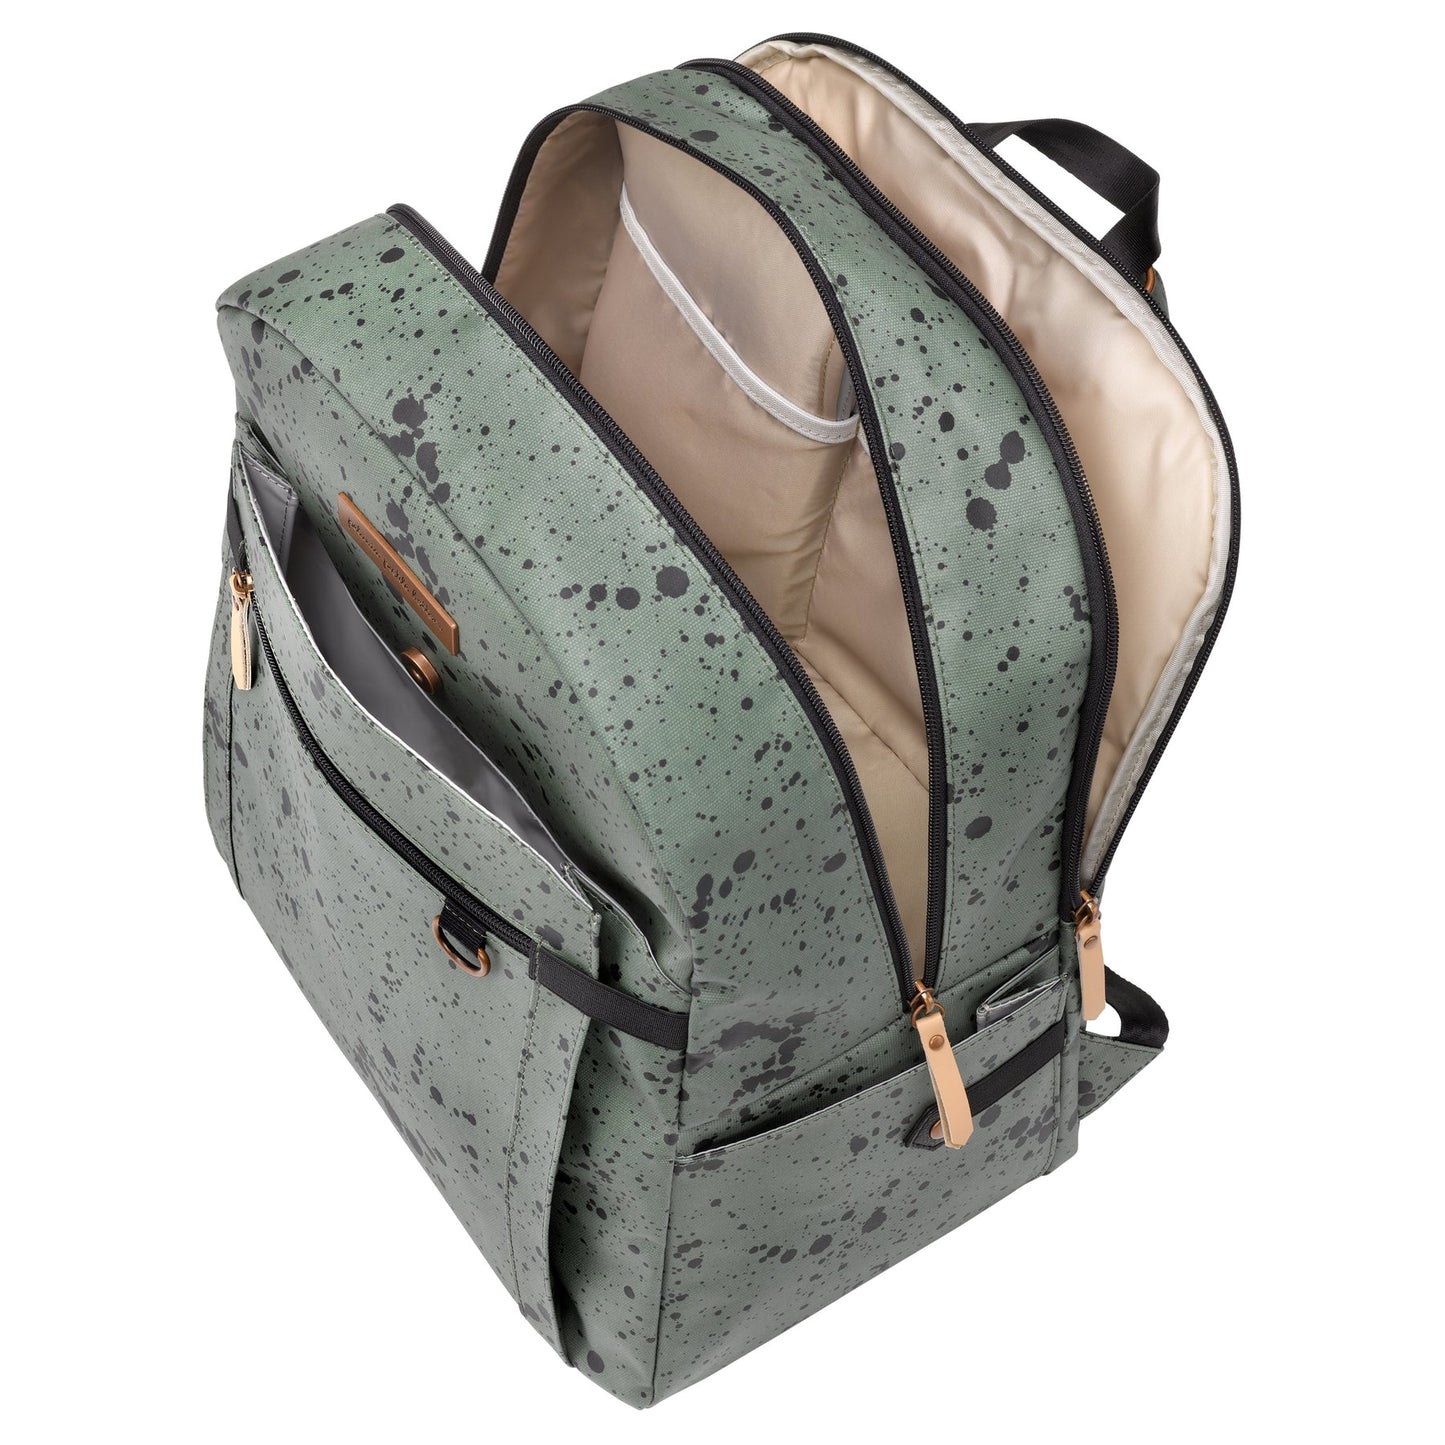 2-IN-1 PROVISIONS BREAST PUMP & DIAPER BAG BACKPACK IN OLIVE INK BLOT